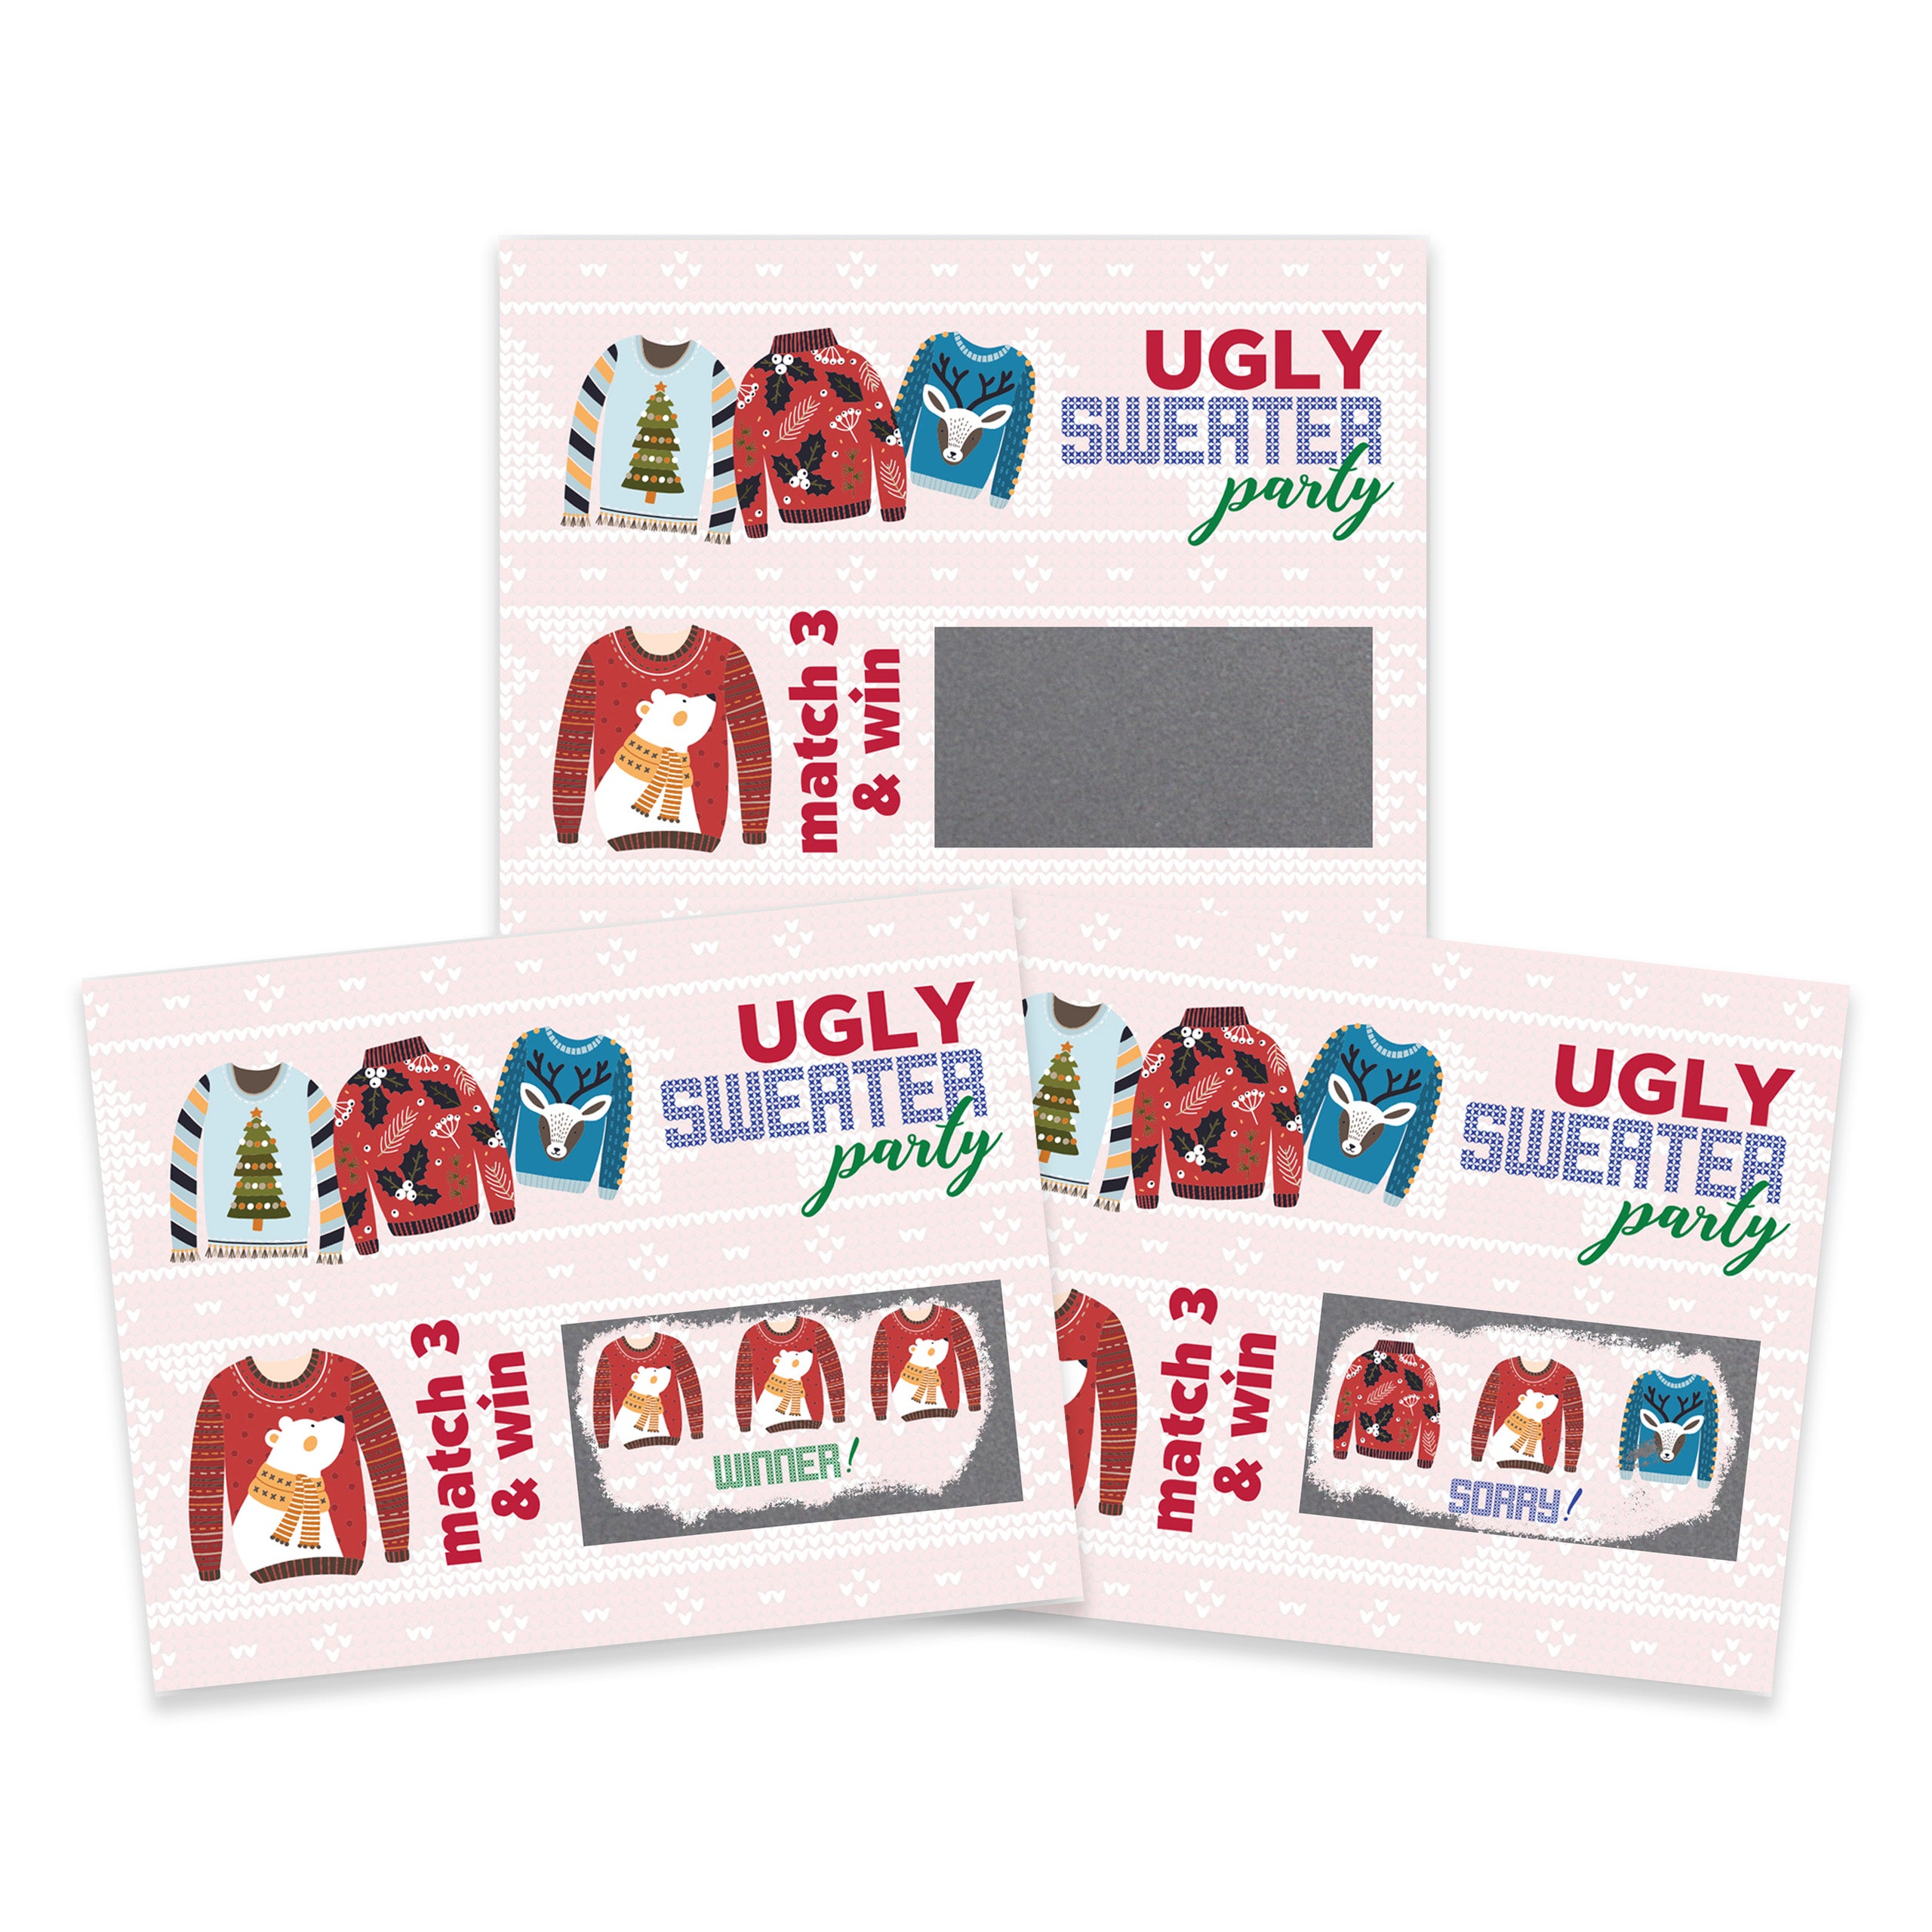 Holiday Ugly Sweater Scratch Off Game Card 26 Pack - 2 Winning and 24 Non-Winning Cards